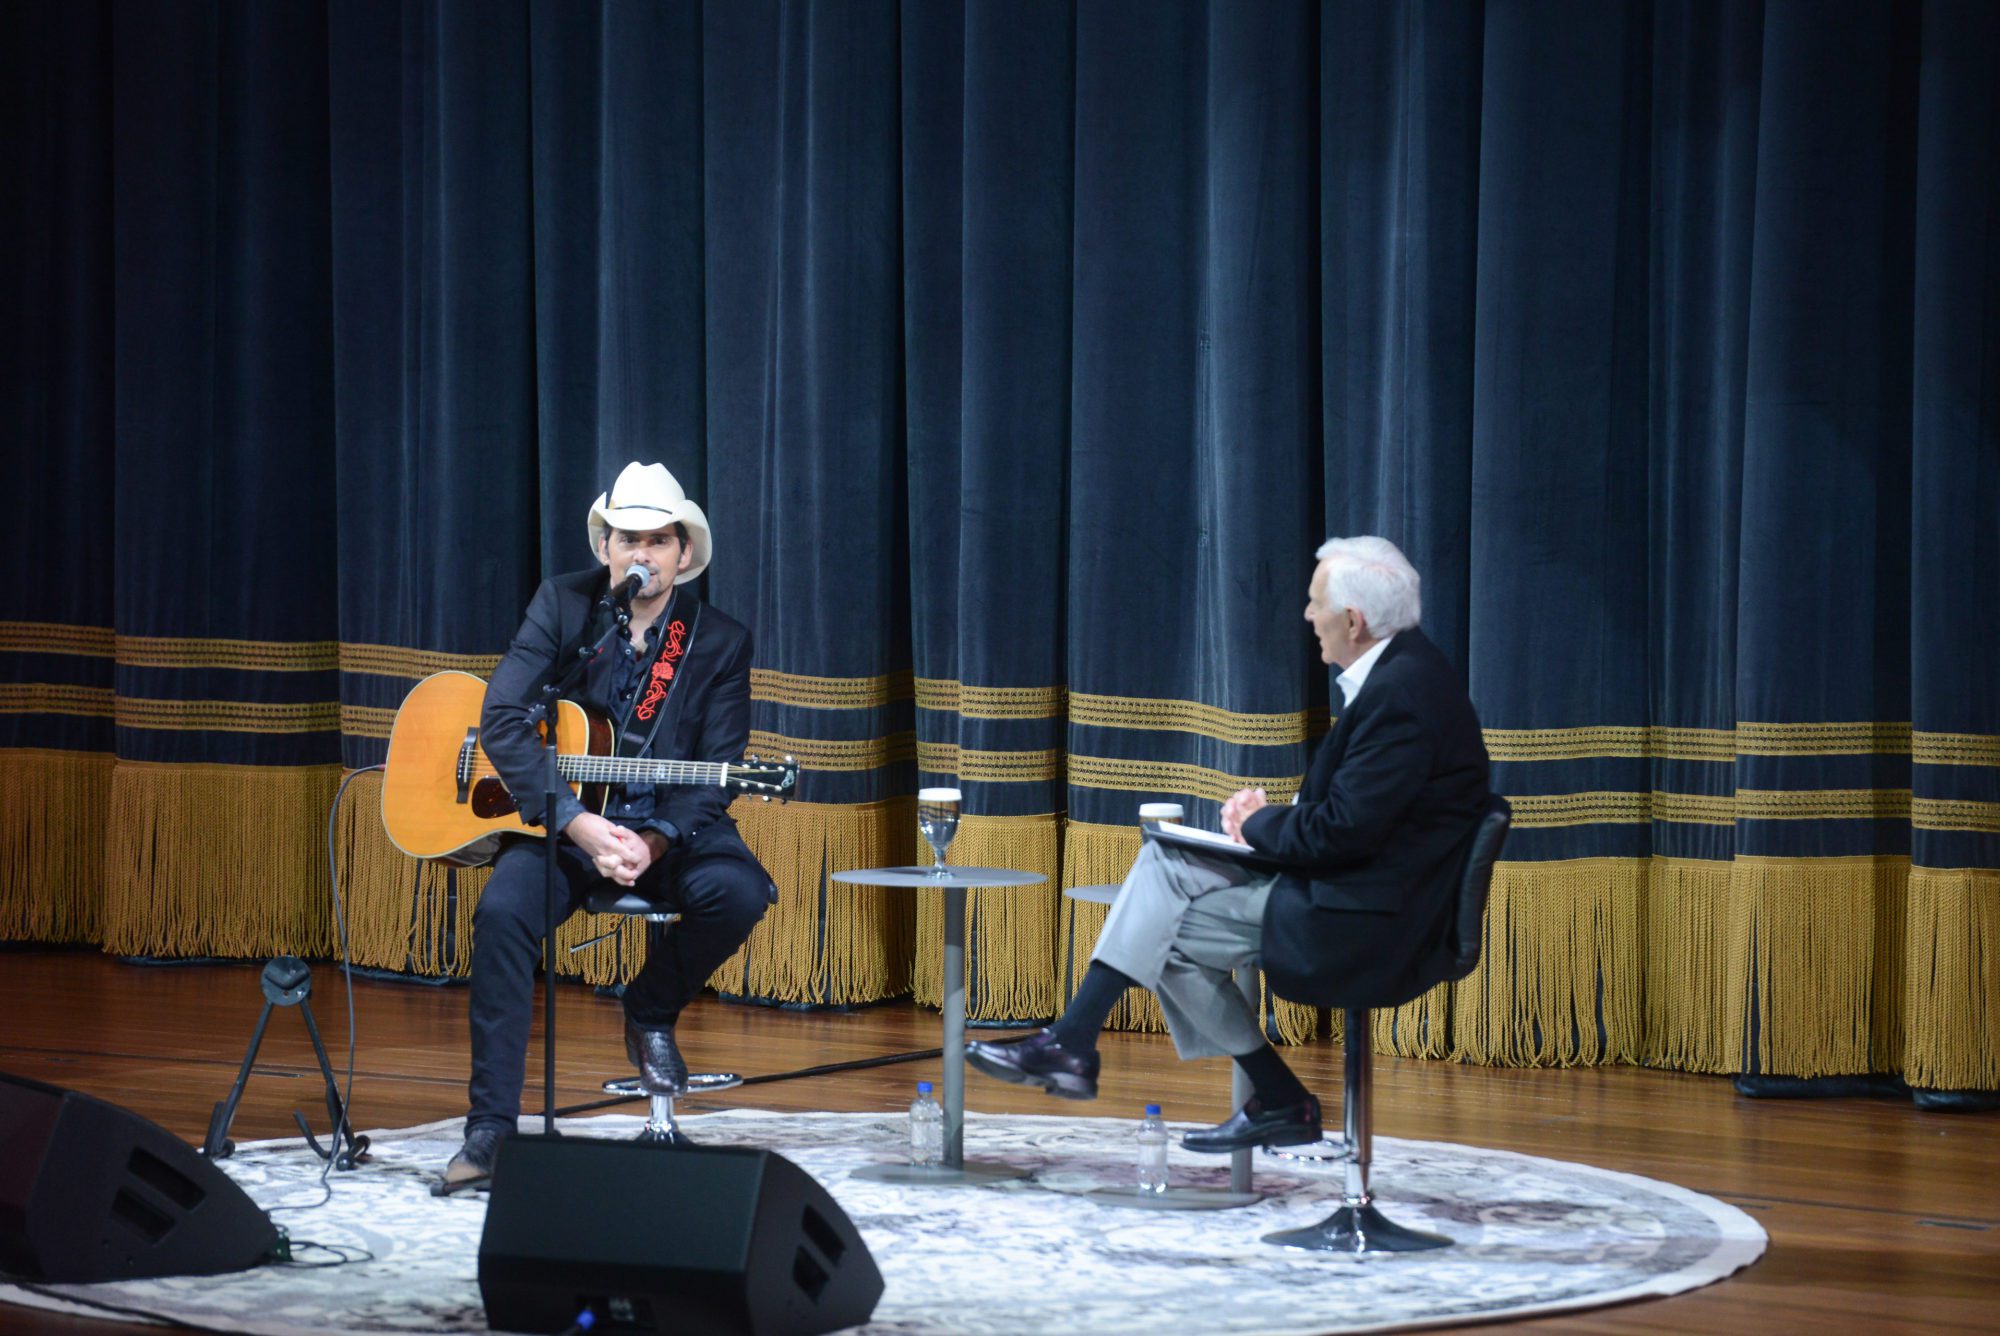 A Night of Stories and Songs with Brad Paisley and Harry Chapman at Belmont University in Nashville, Tennessee, November 4, 2021.